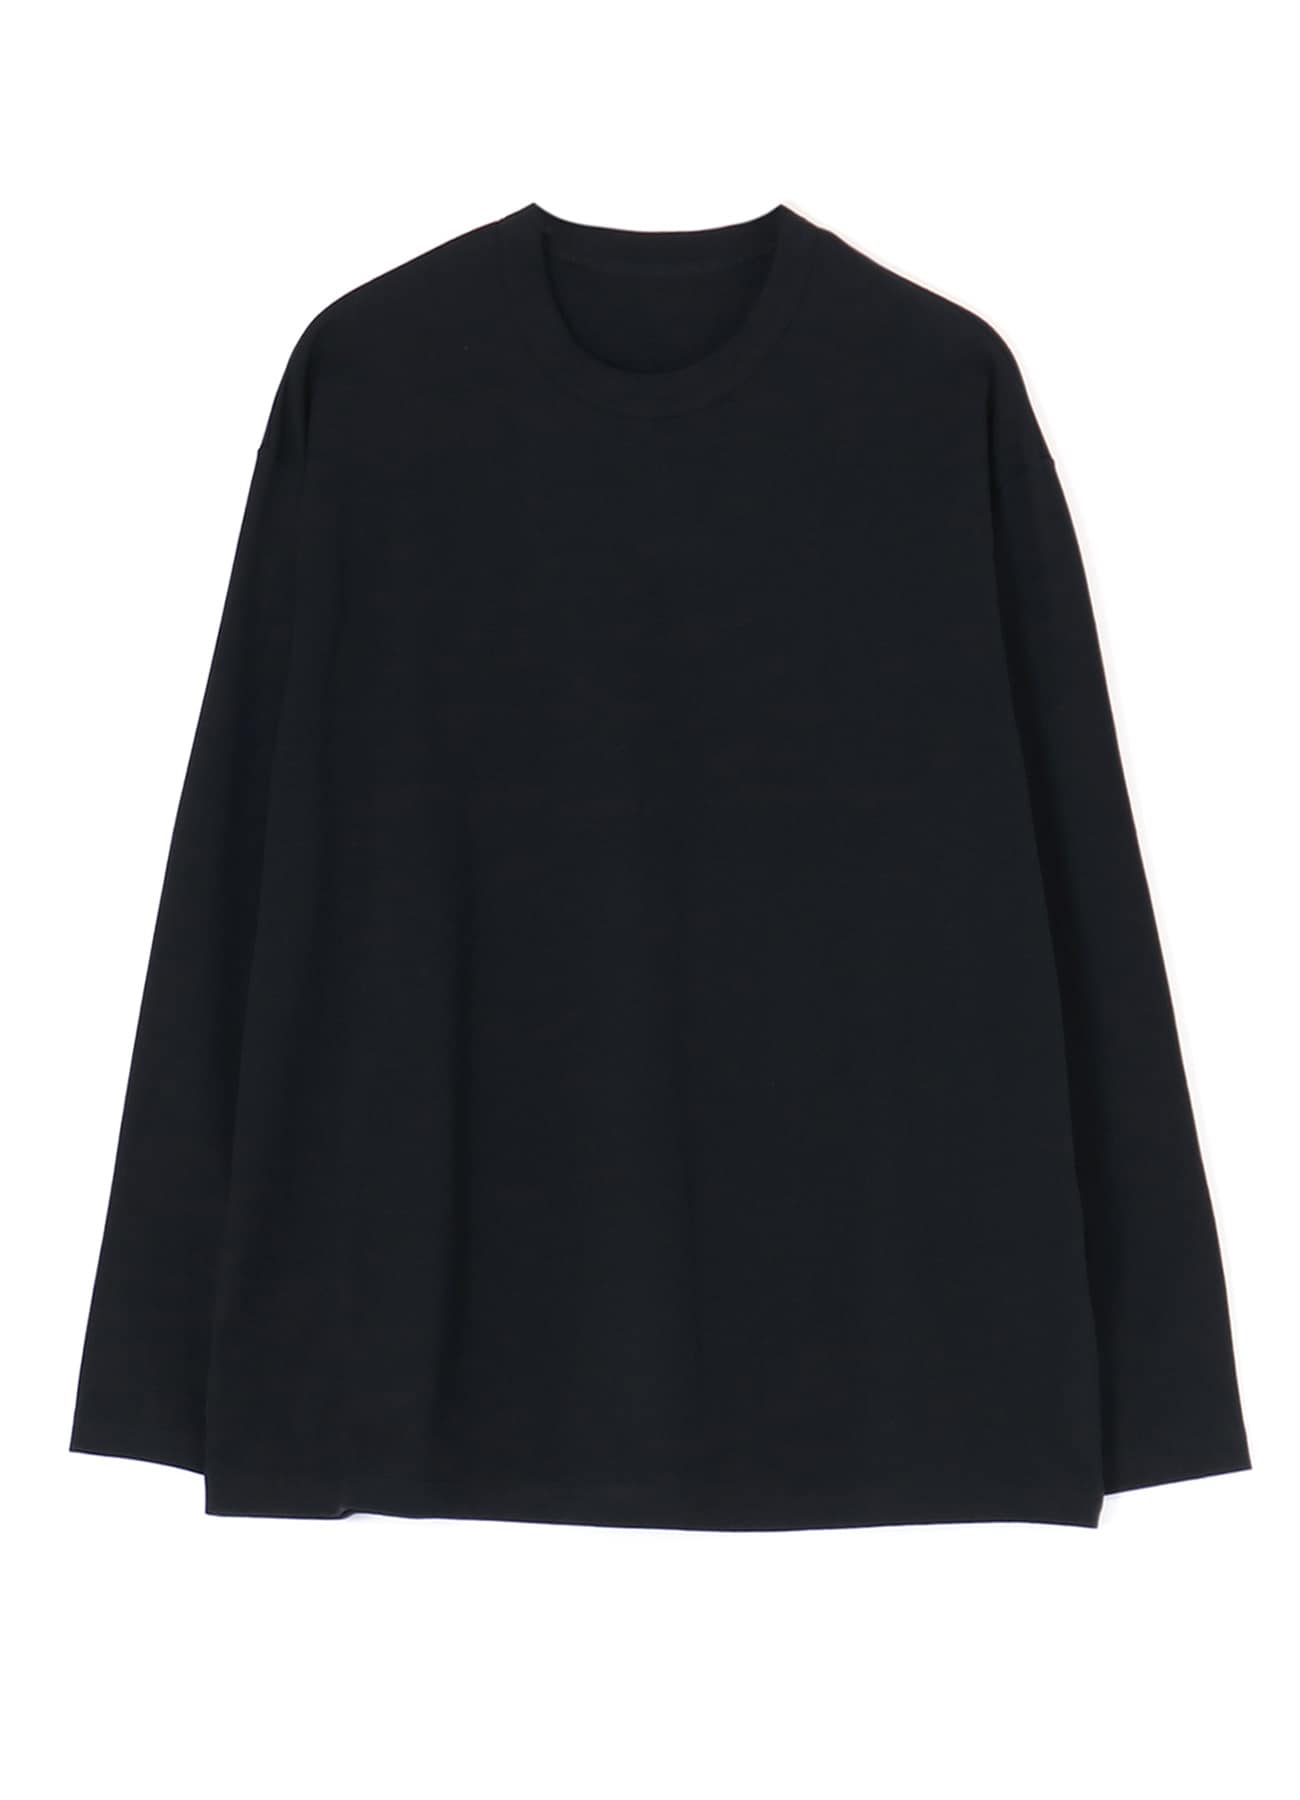 40/2 COTTON JERSEY LONG SLEEVE SHIRT (L)(L Black): Y's for living 